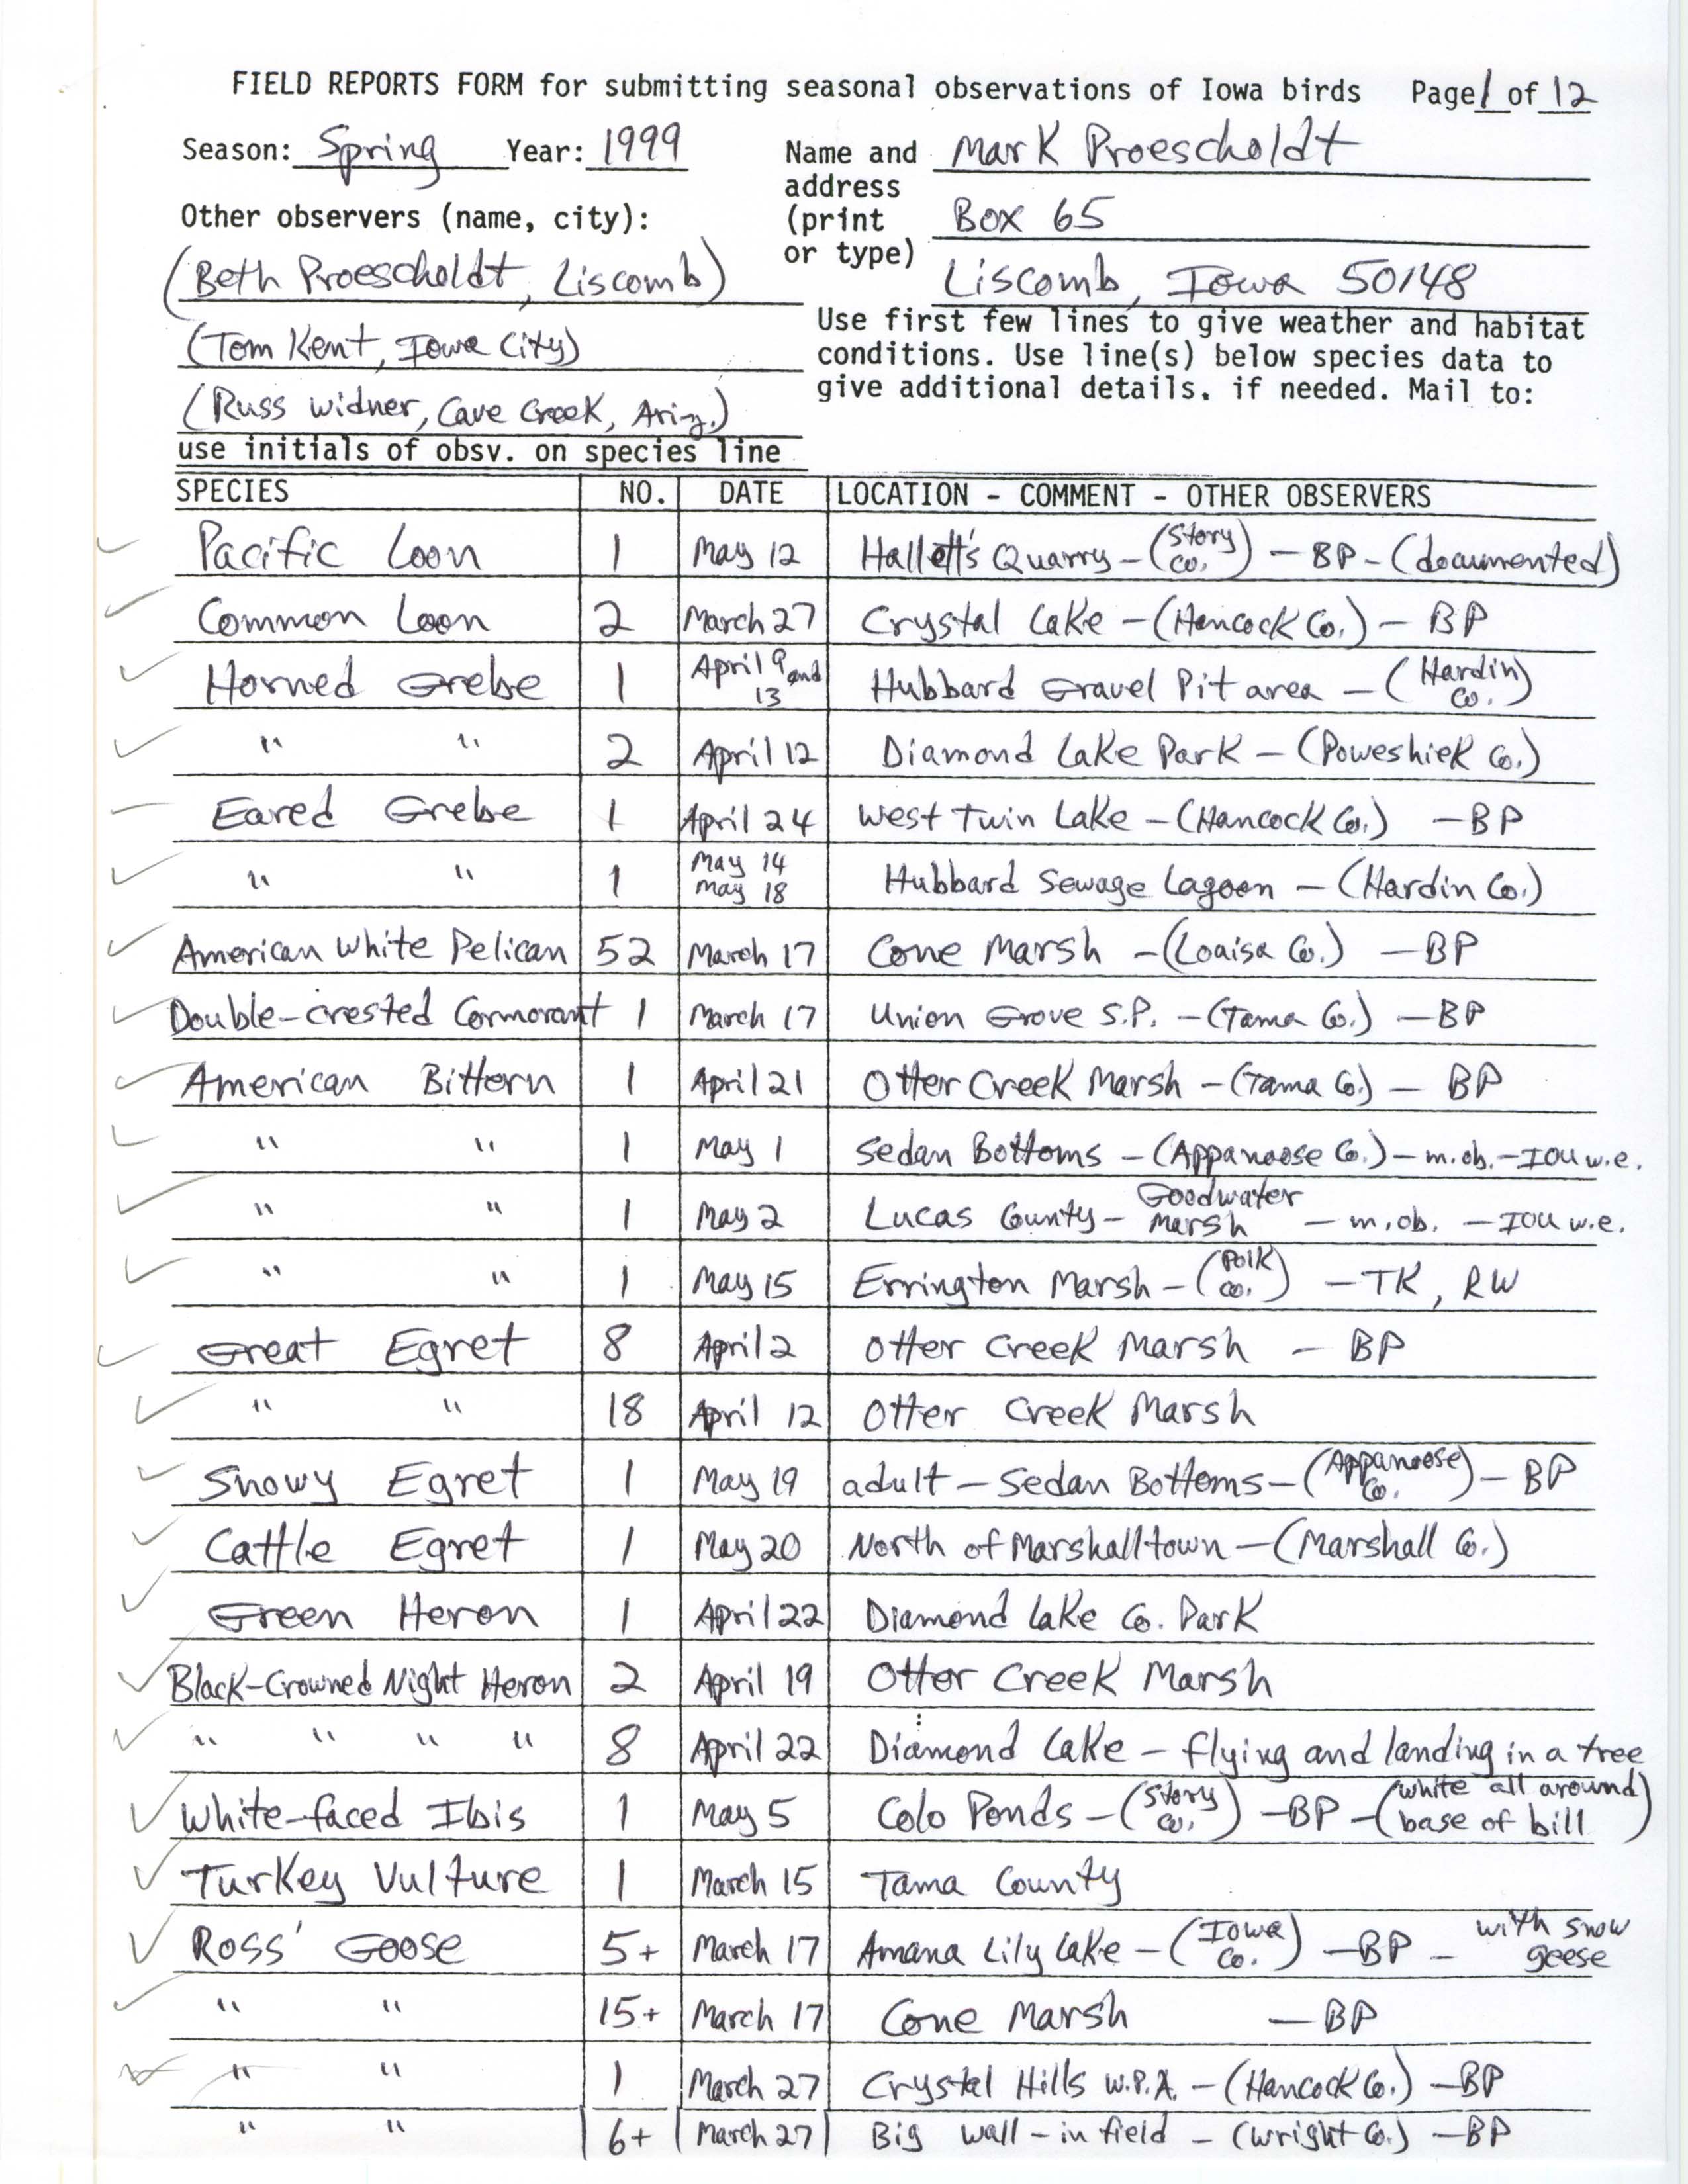 Field reports form for submitting seasonal observations of Iowa birds, Mark Proescholdt, spring 1999